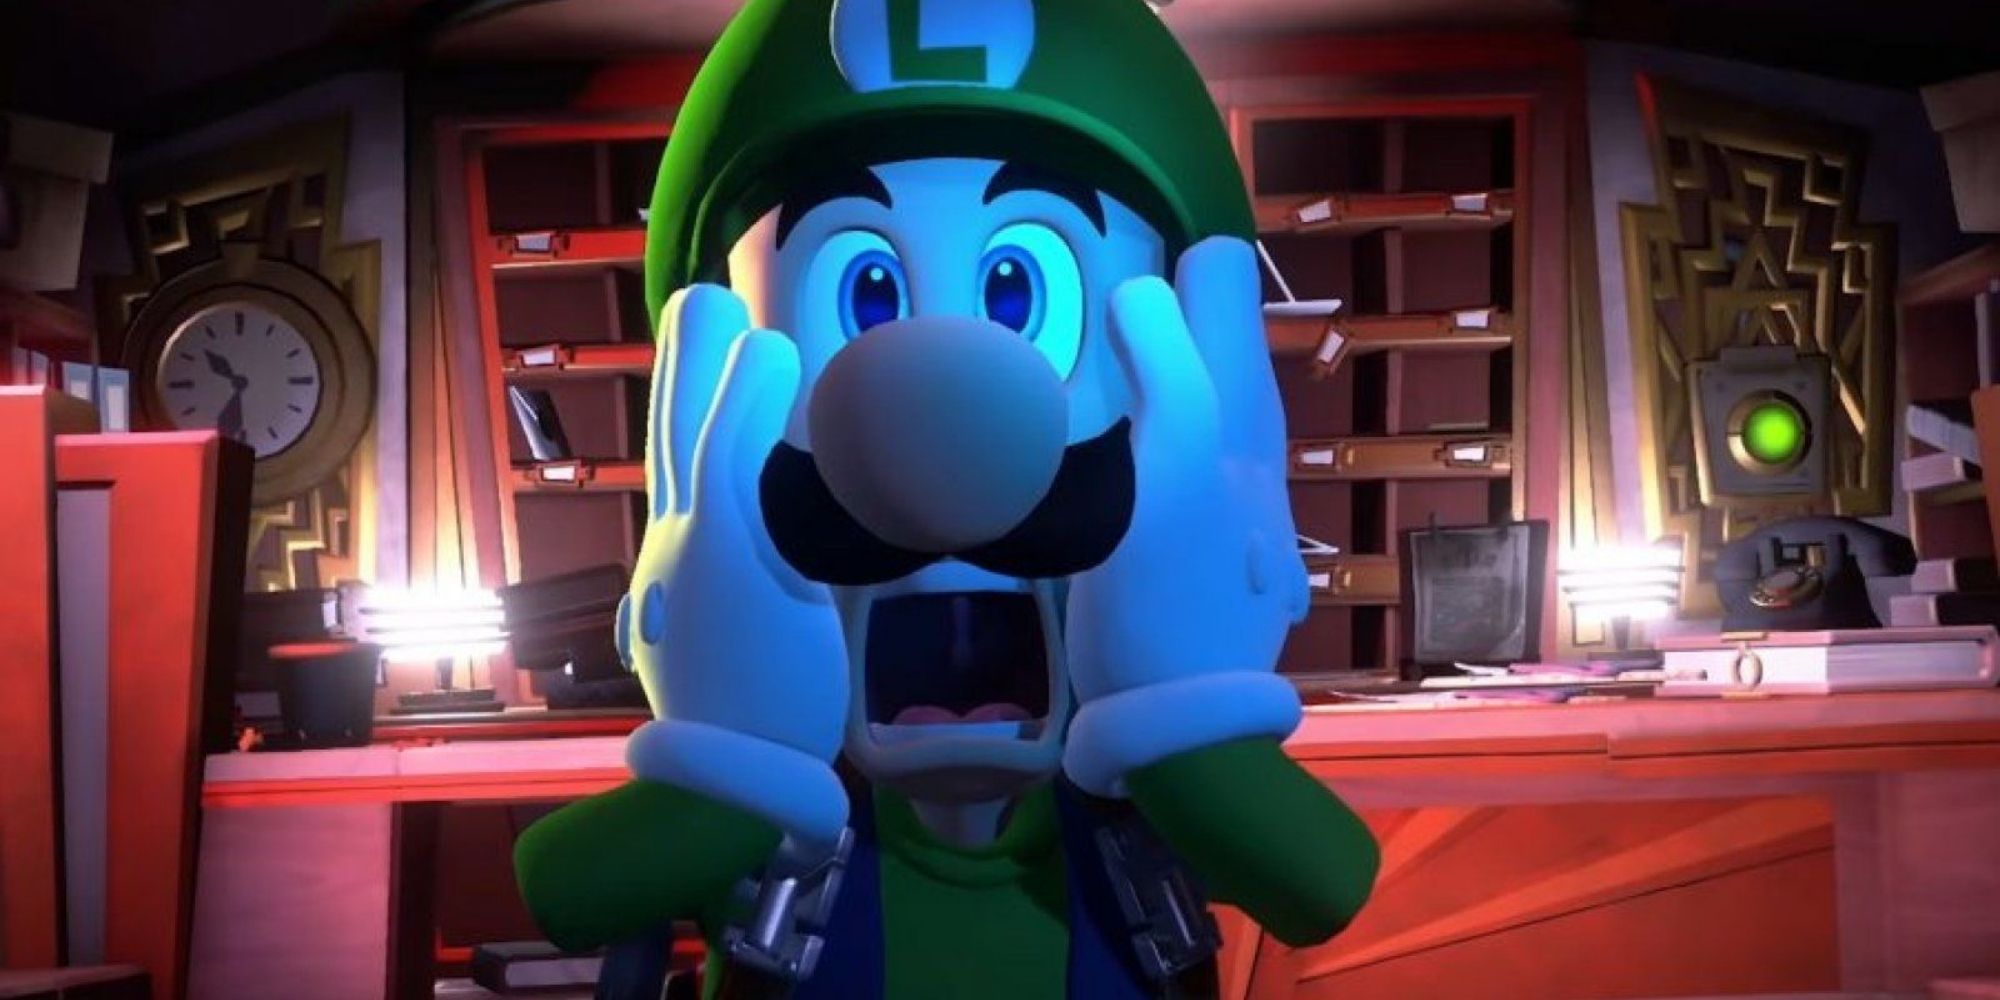 Luigi's looks scared in front of the hotel desk